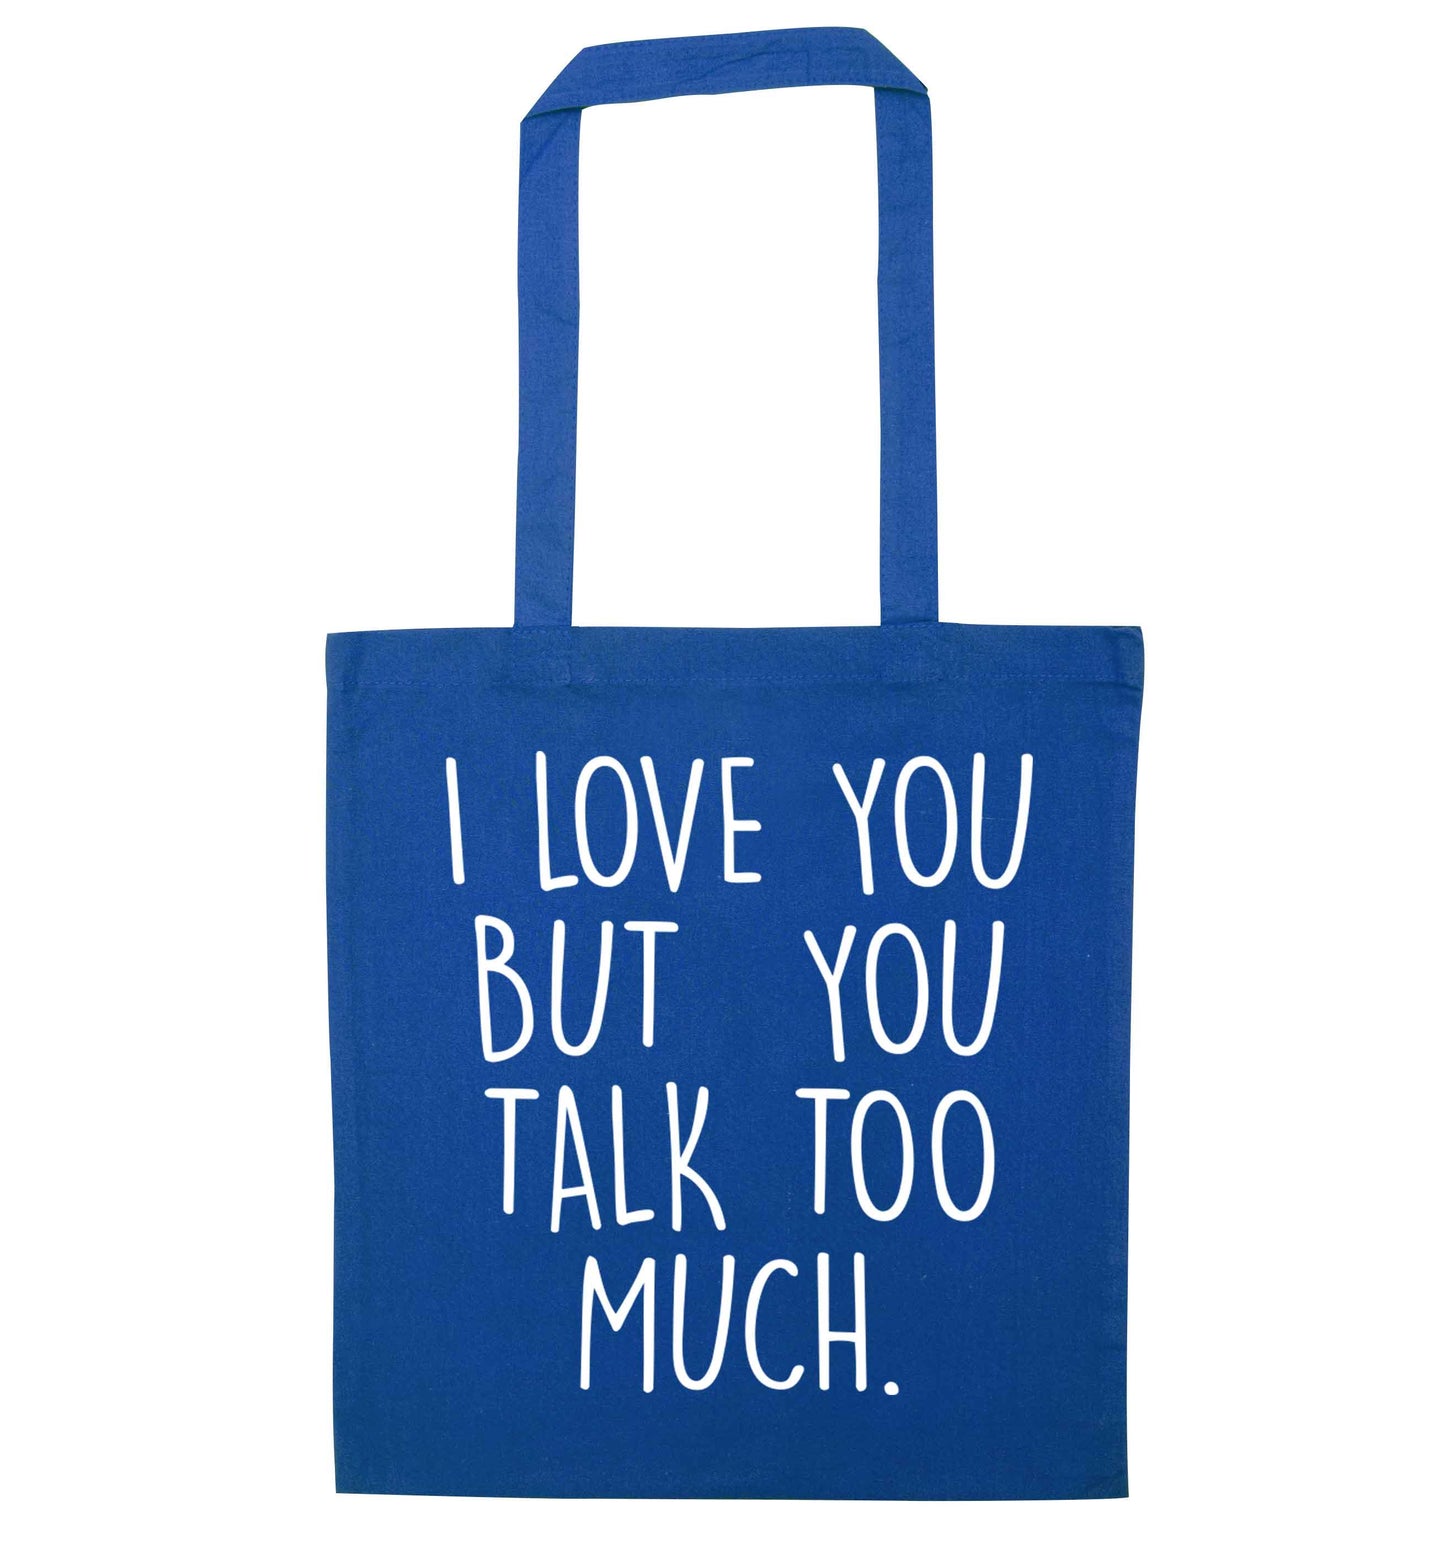 I love you but you talk too much blue tote bag